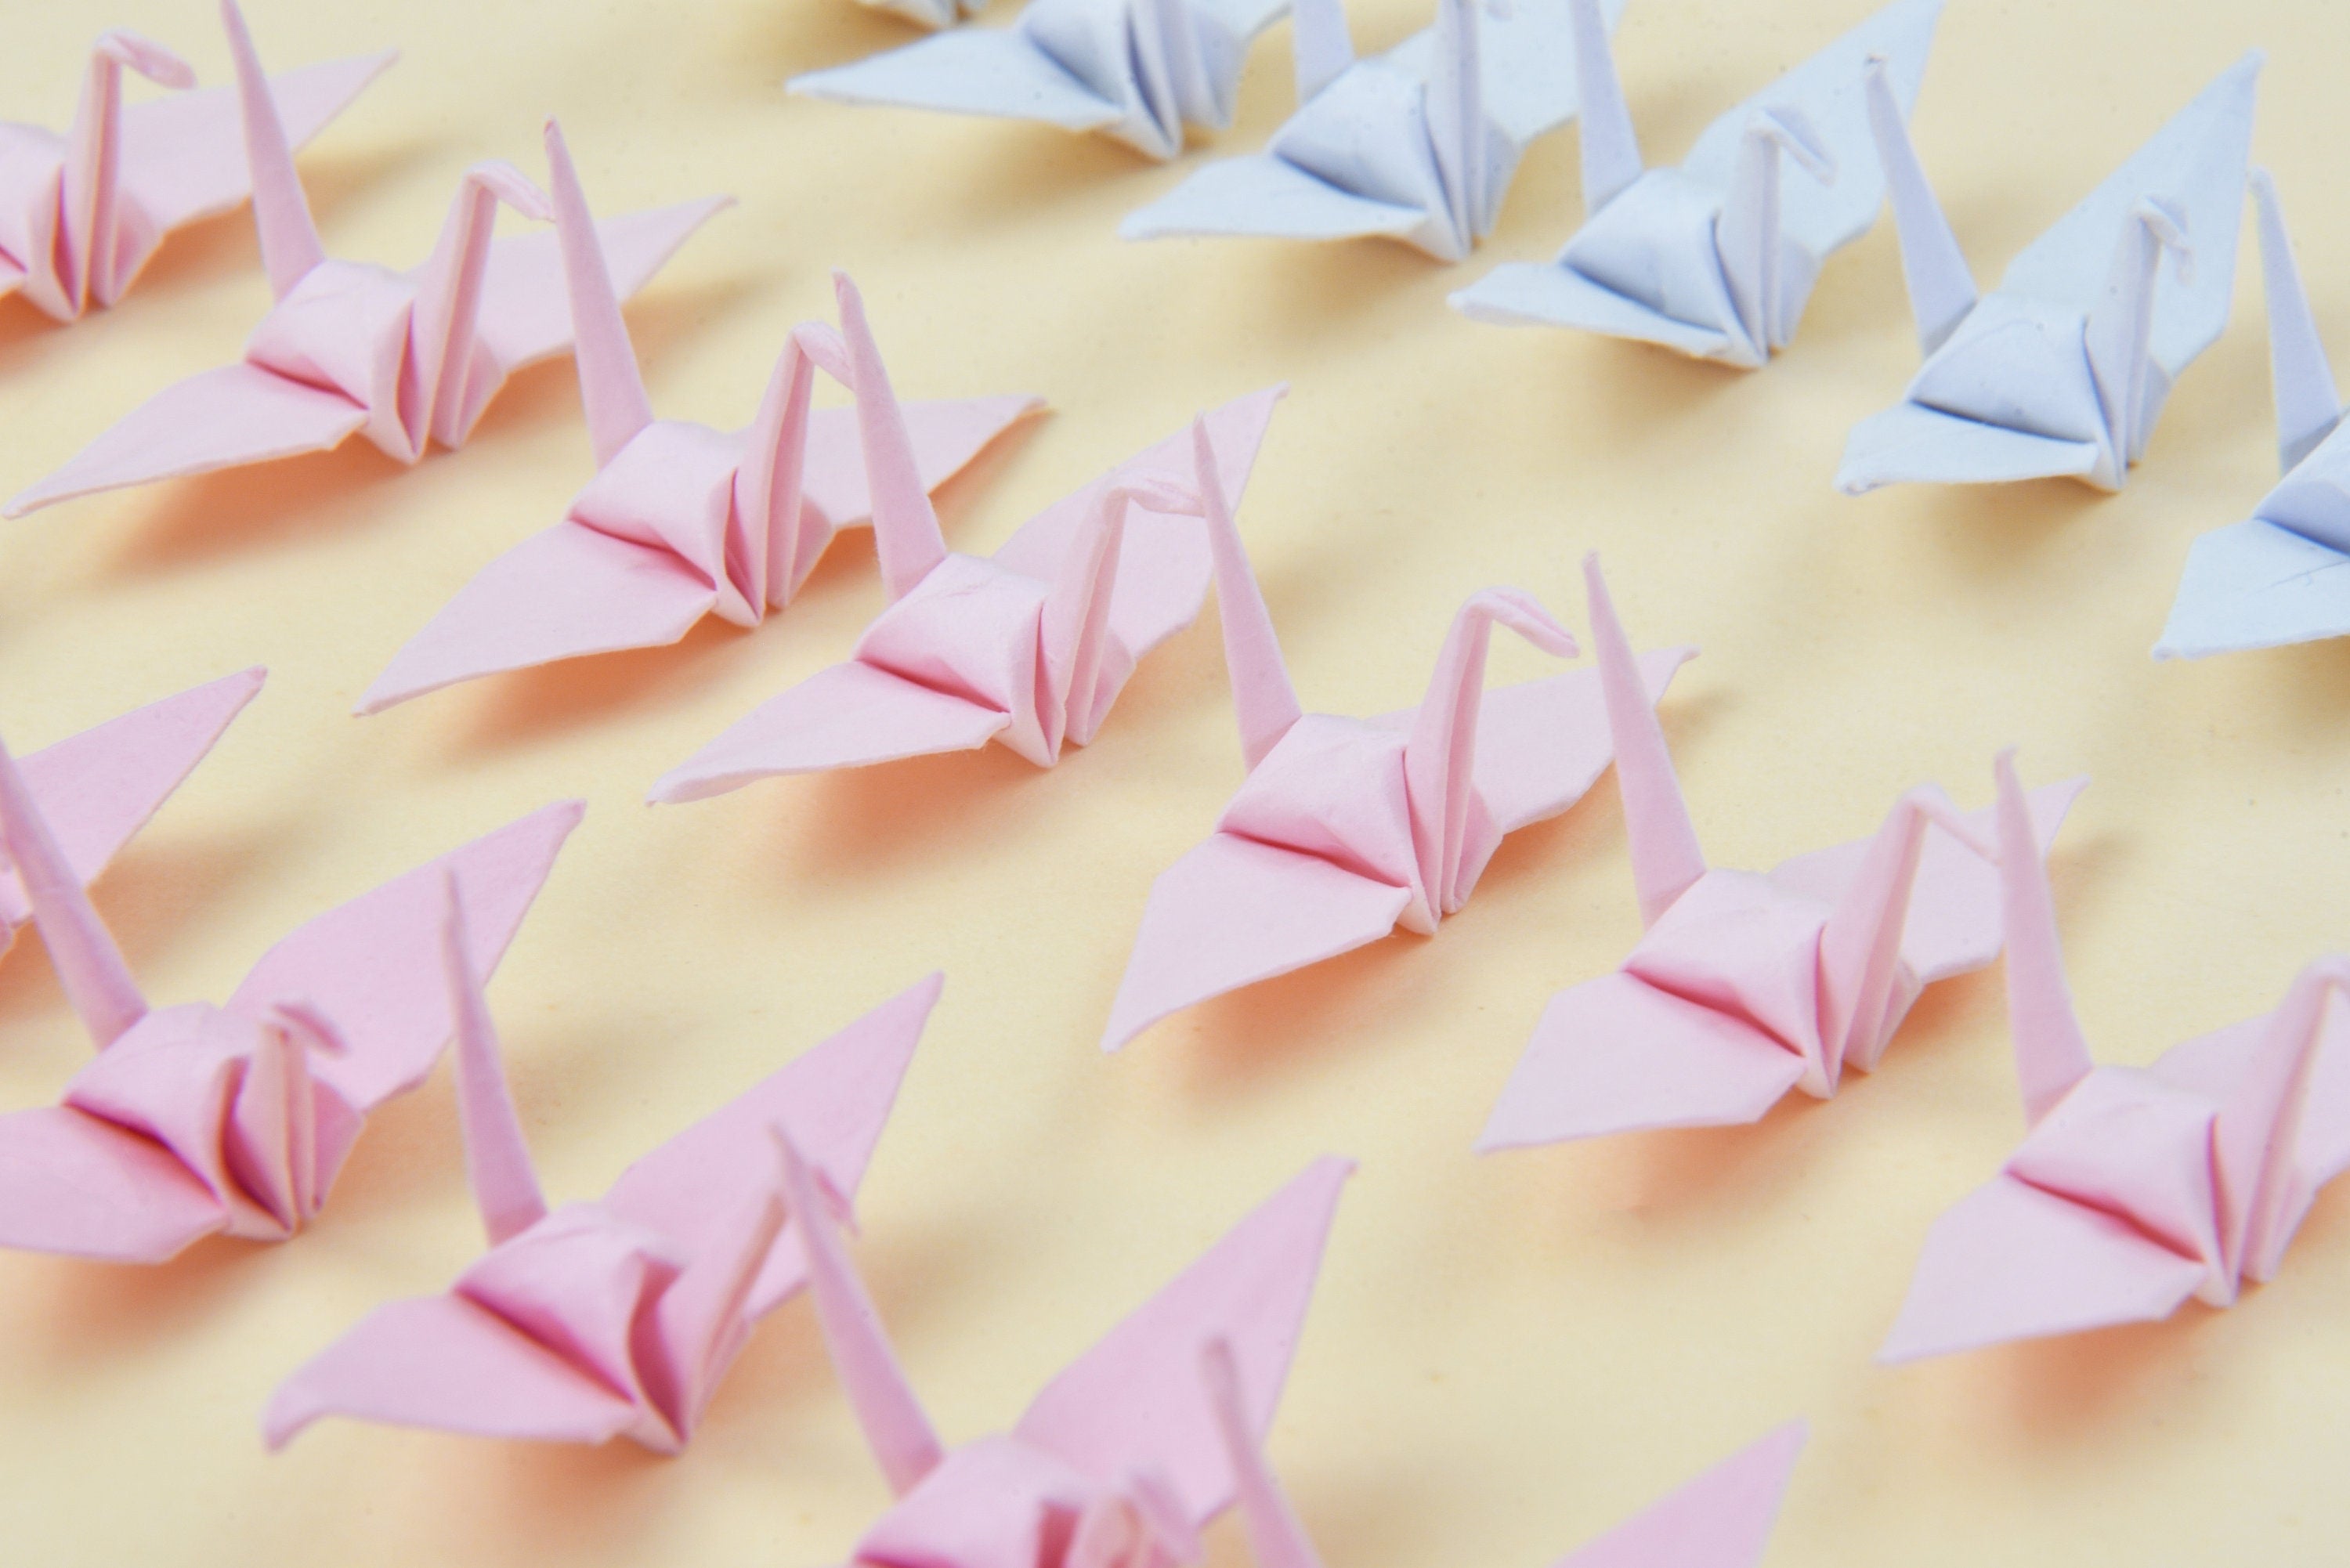 100 Pink Shade Origami Paper Crane Made of 1.5 inches-Origami crane for Wedding, Valentine's Gift, Christmas by OrigamiPolly